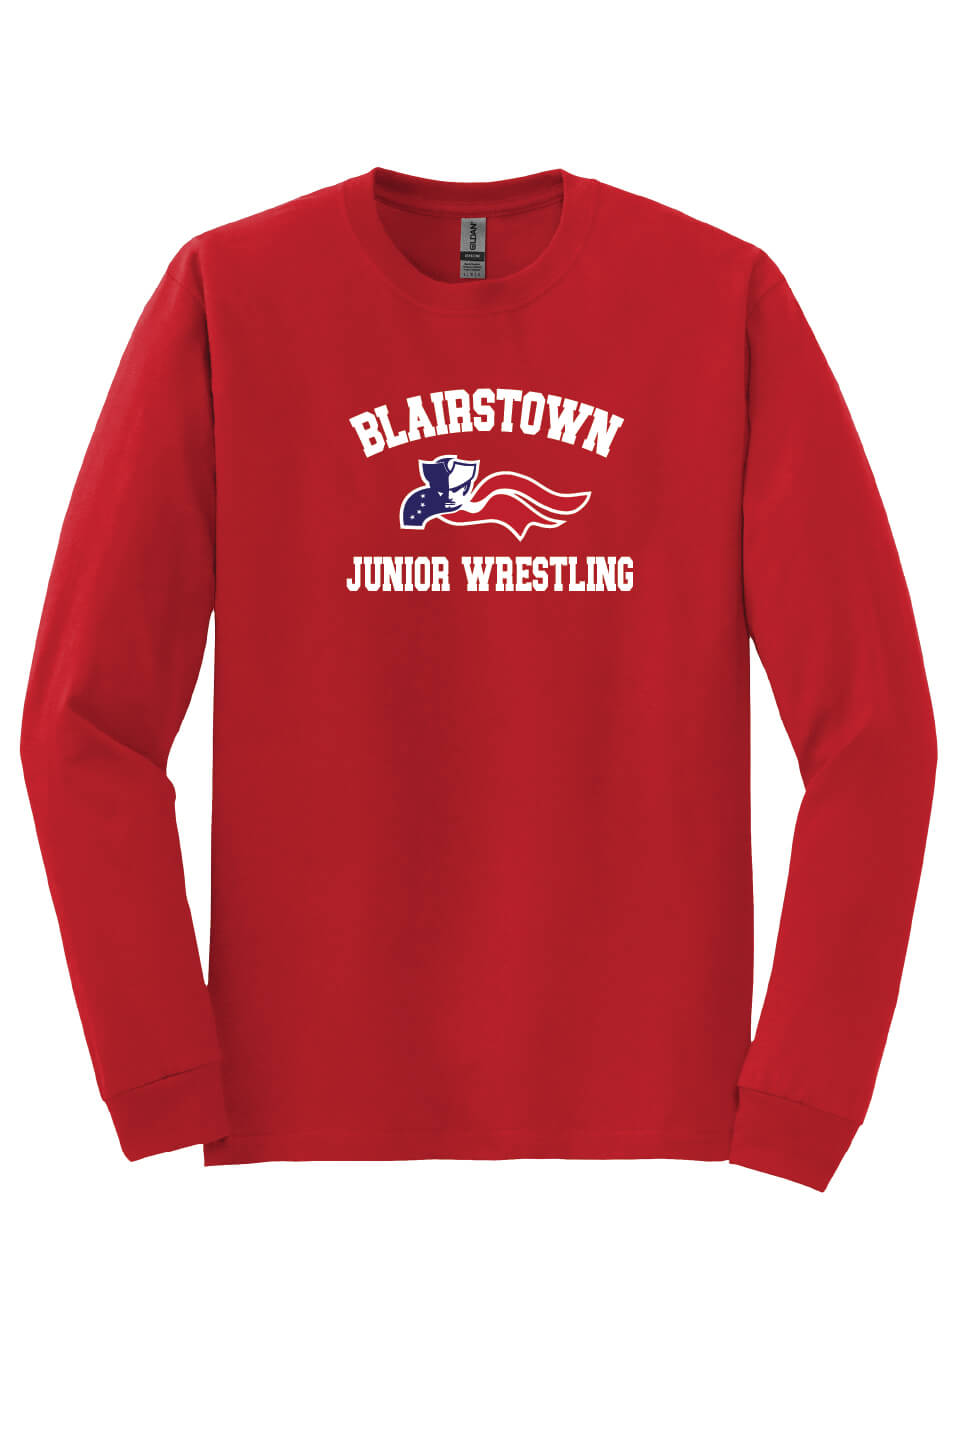 Blairstown JR Wrestling Long Sleeve T-Shirt (Youth) red